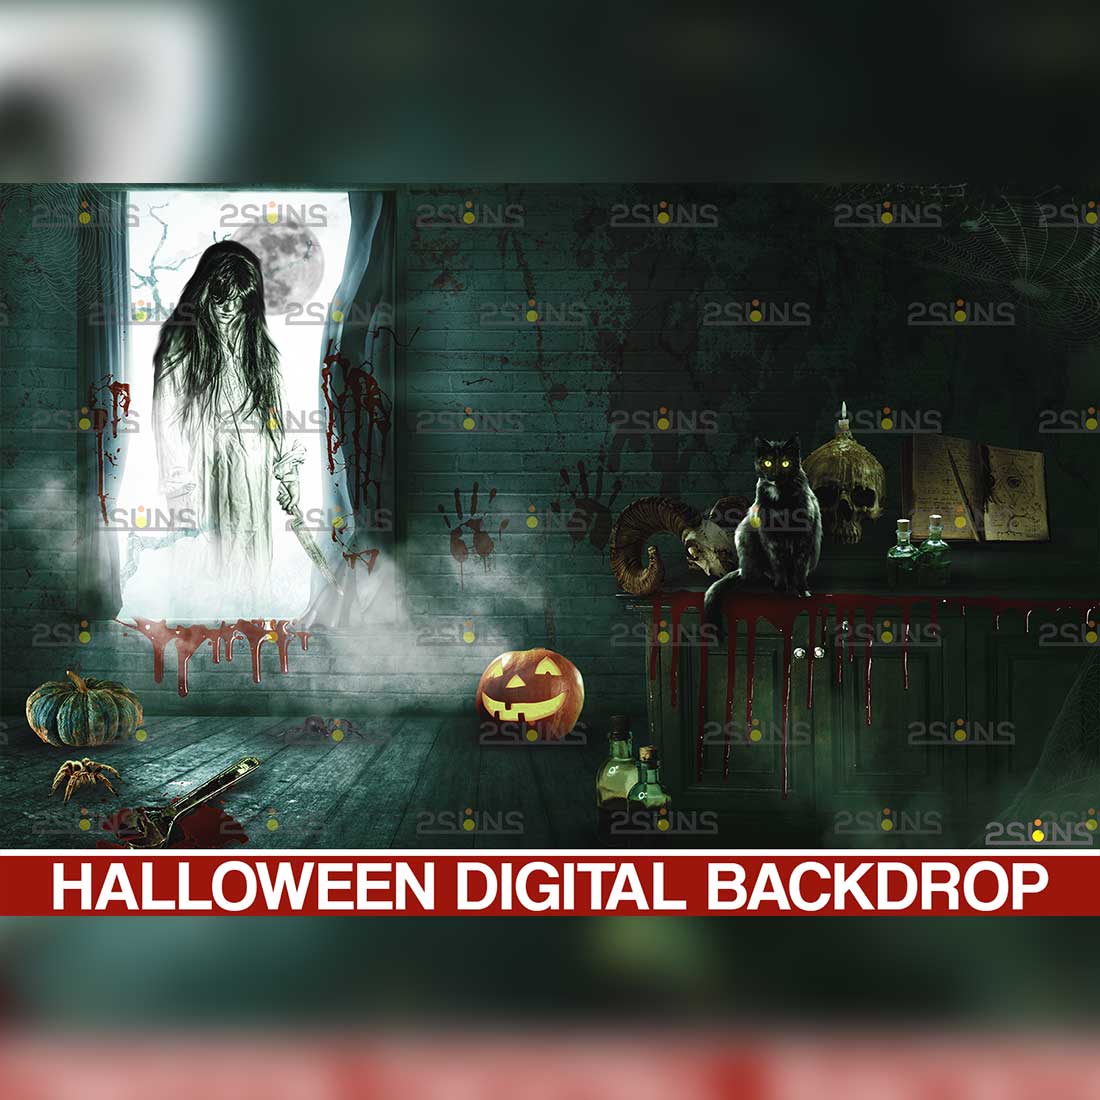 Halloween Ghost Overlay Backdrop Preview Image.